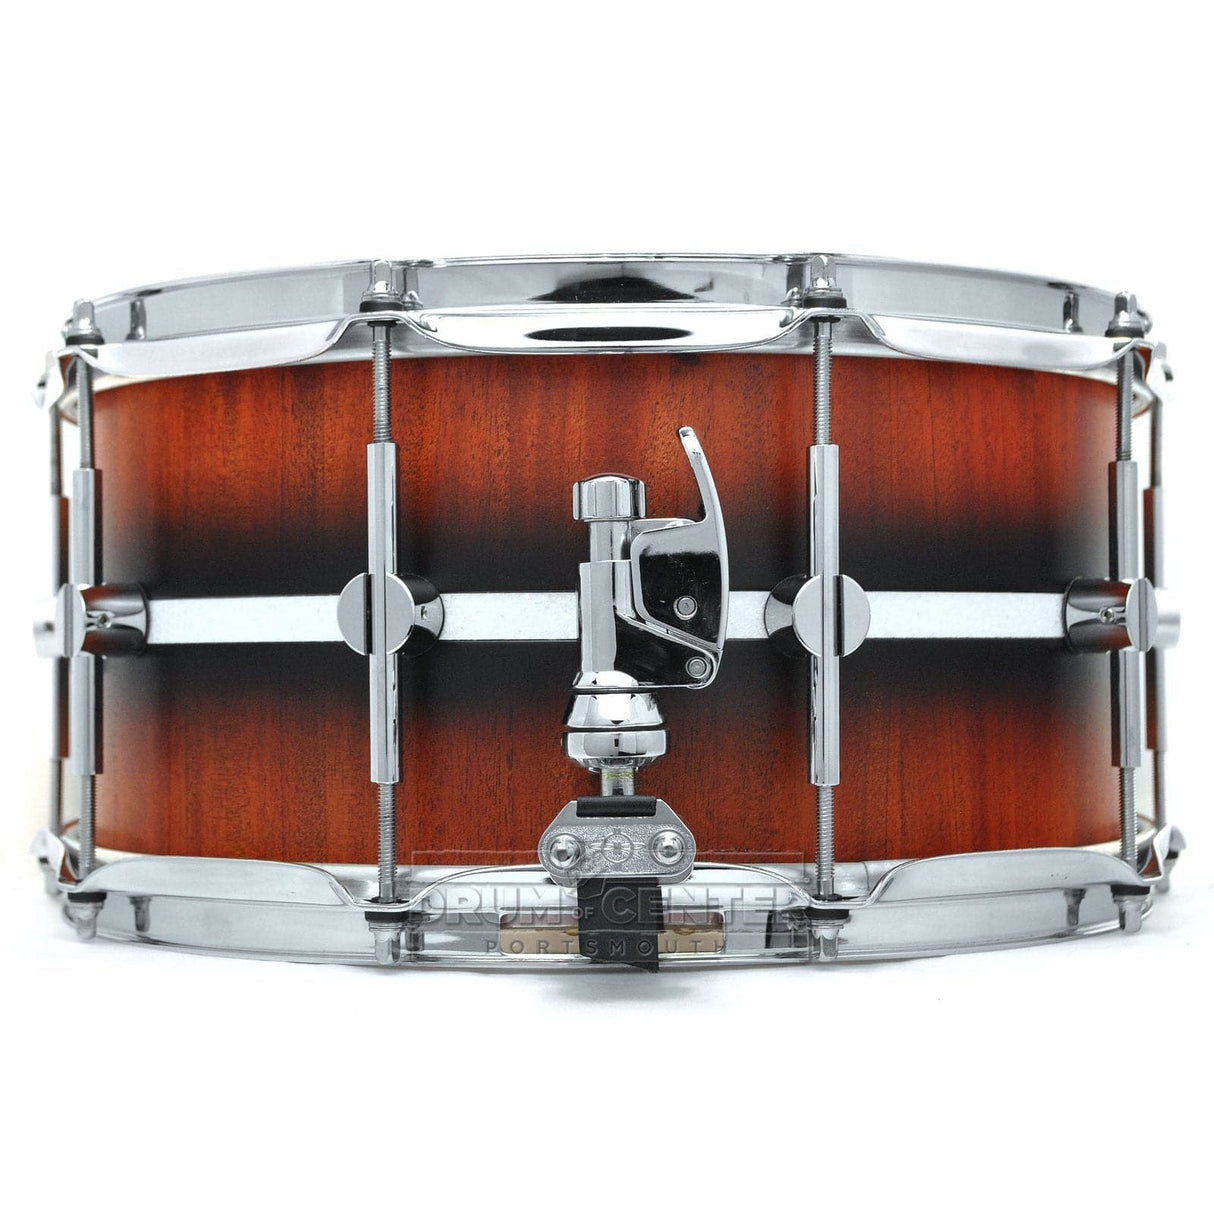 Unix Drums Stave Mahogany Snare Drum 14x7